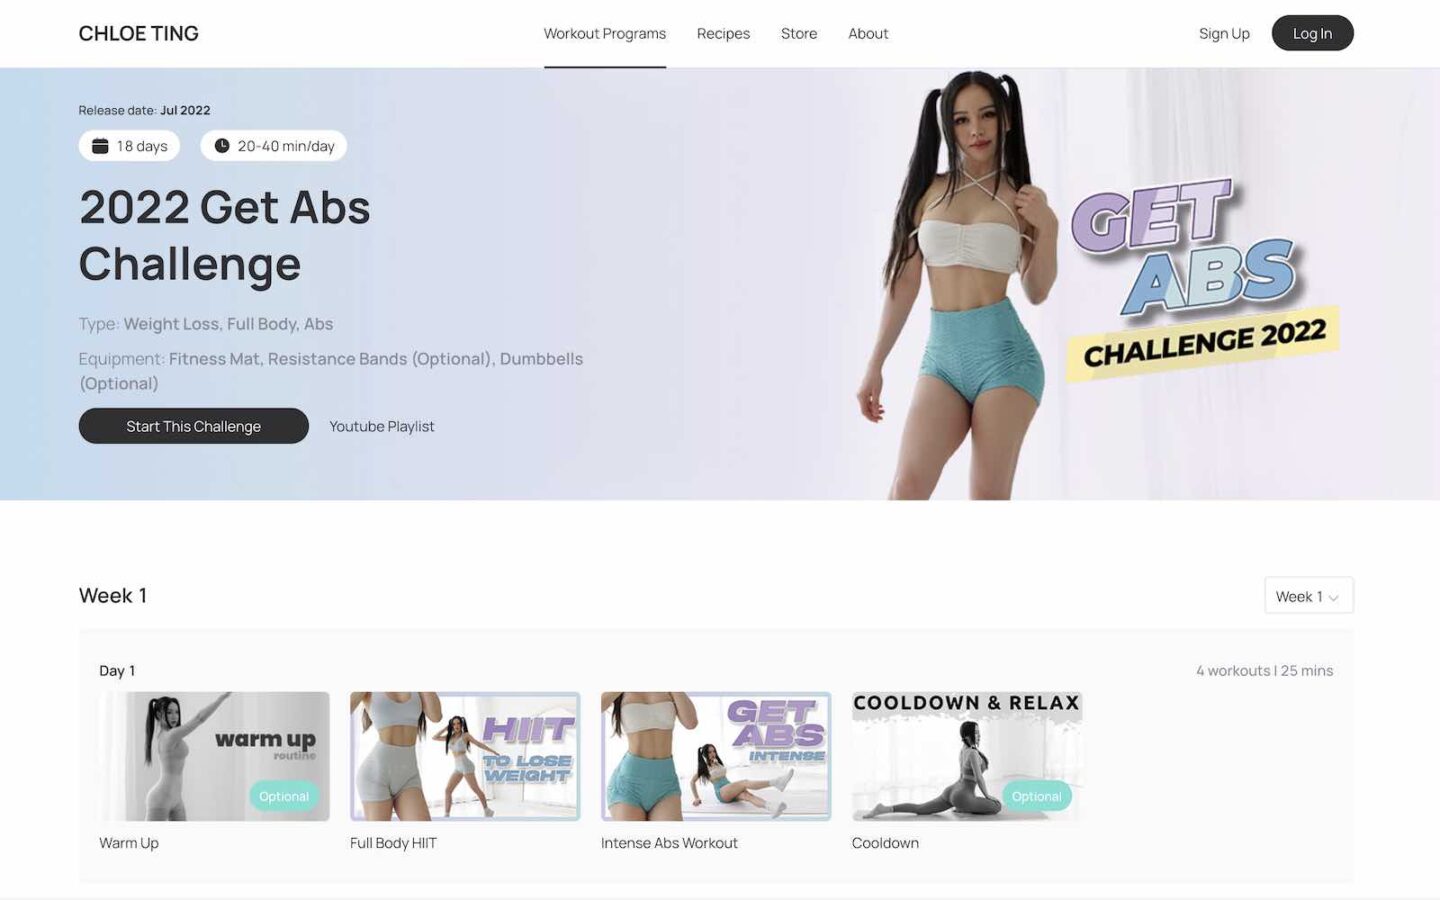 Abs in 7 days? I tried CAROLINE GIRVAN's ab workout before and